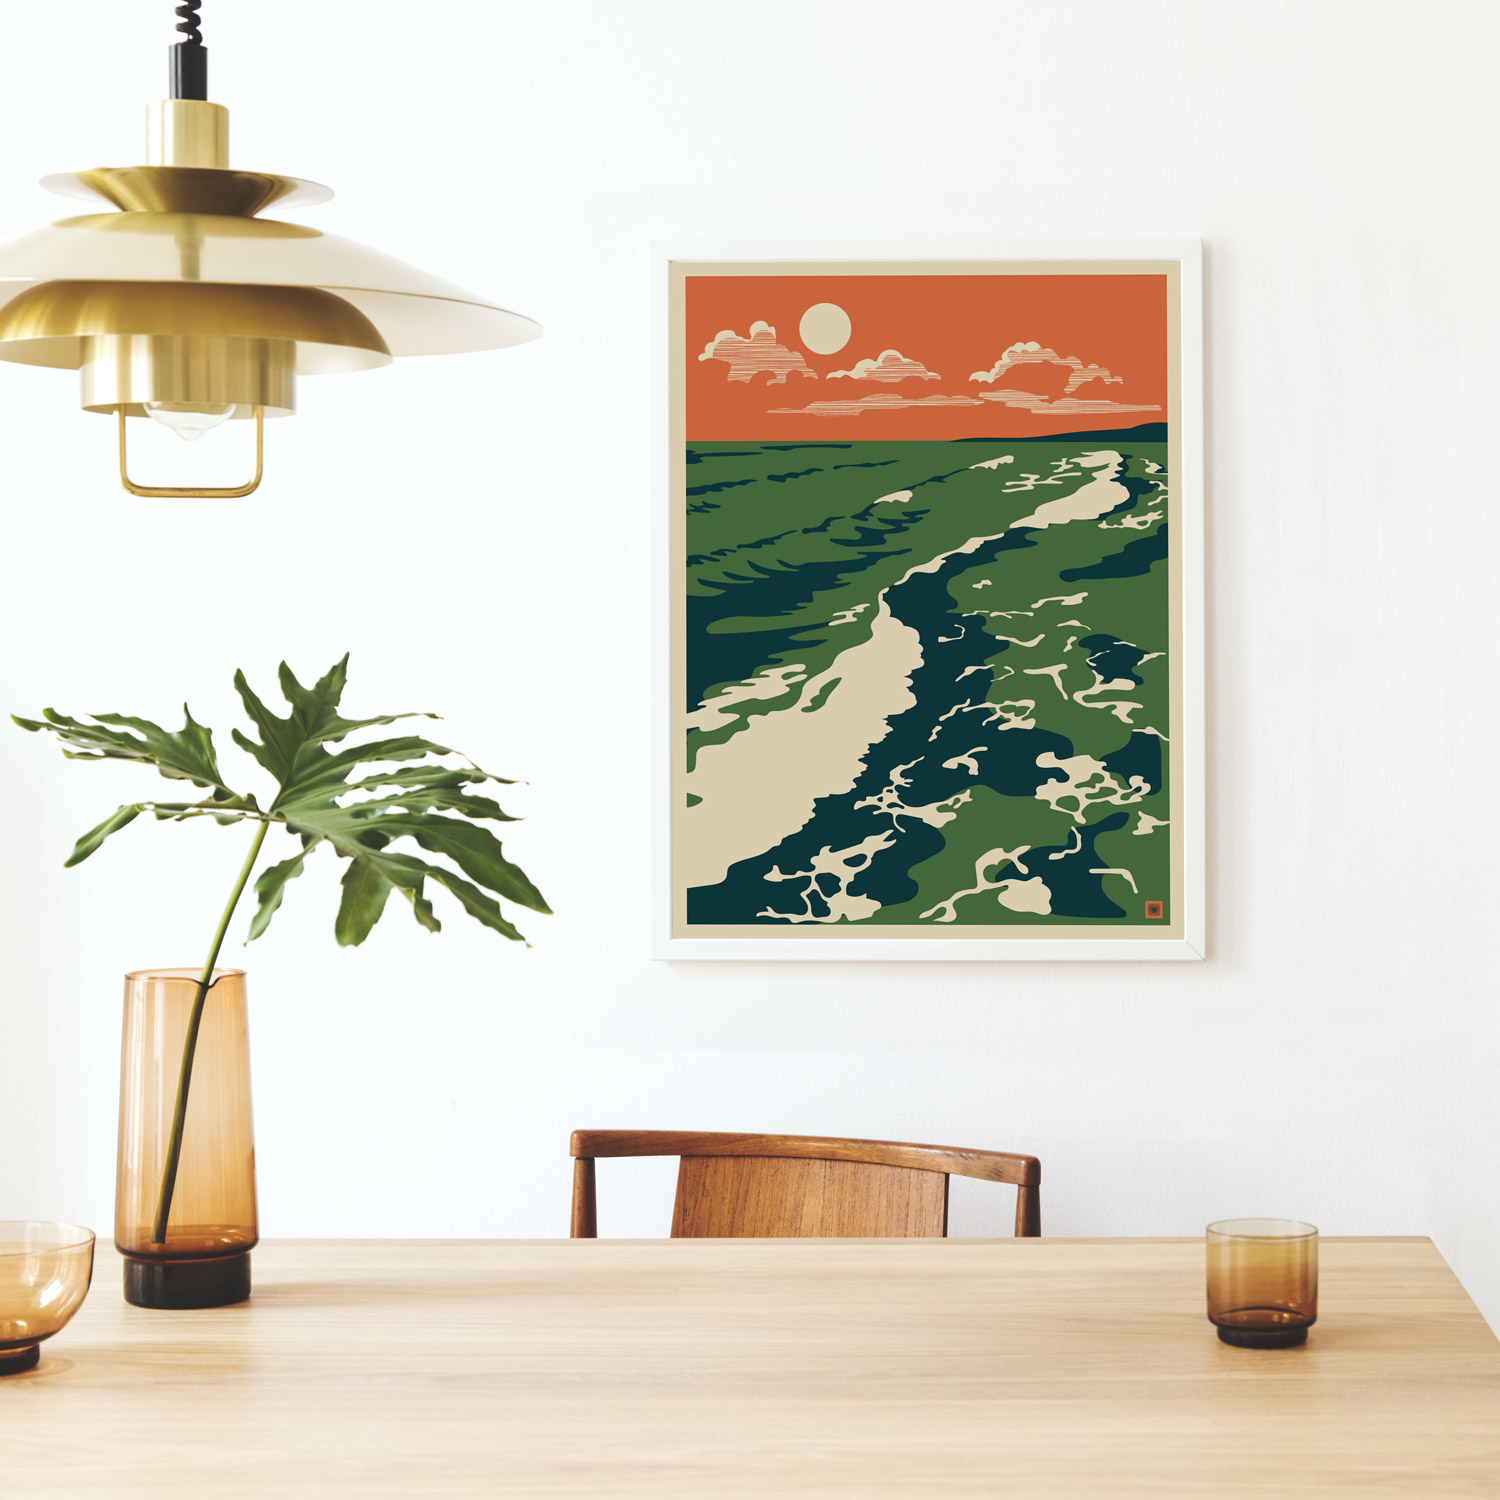 photo of a desk with a plant and a cup with a graphic print on the wall of a beach scene